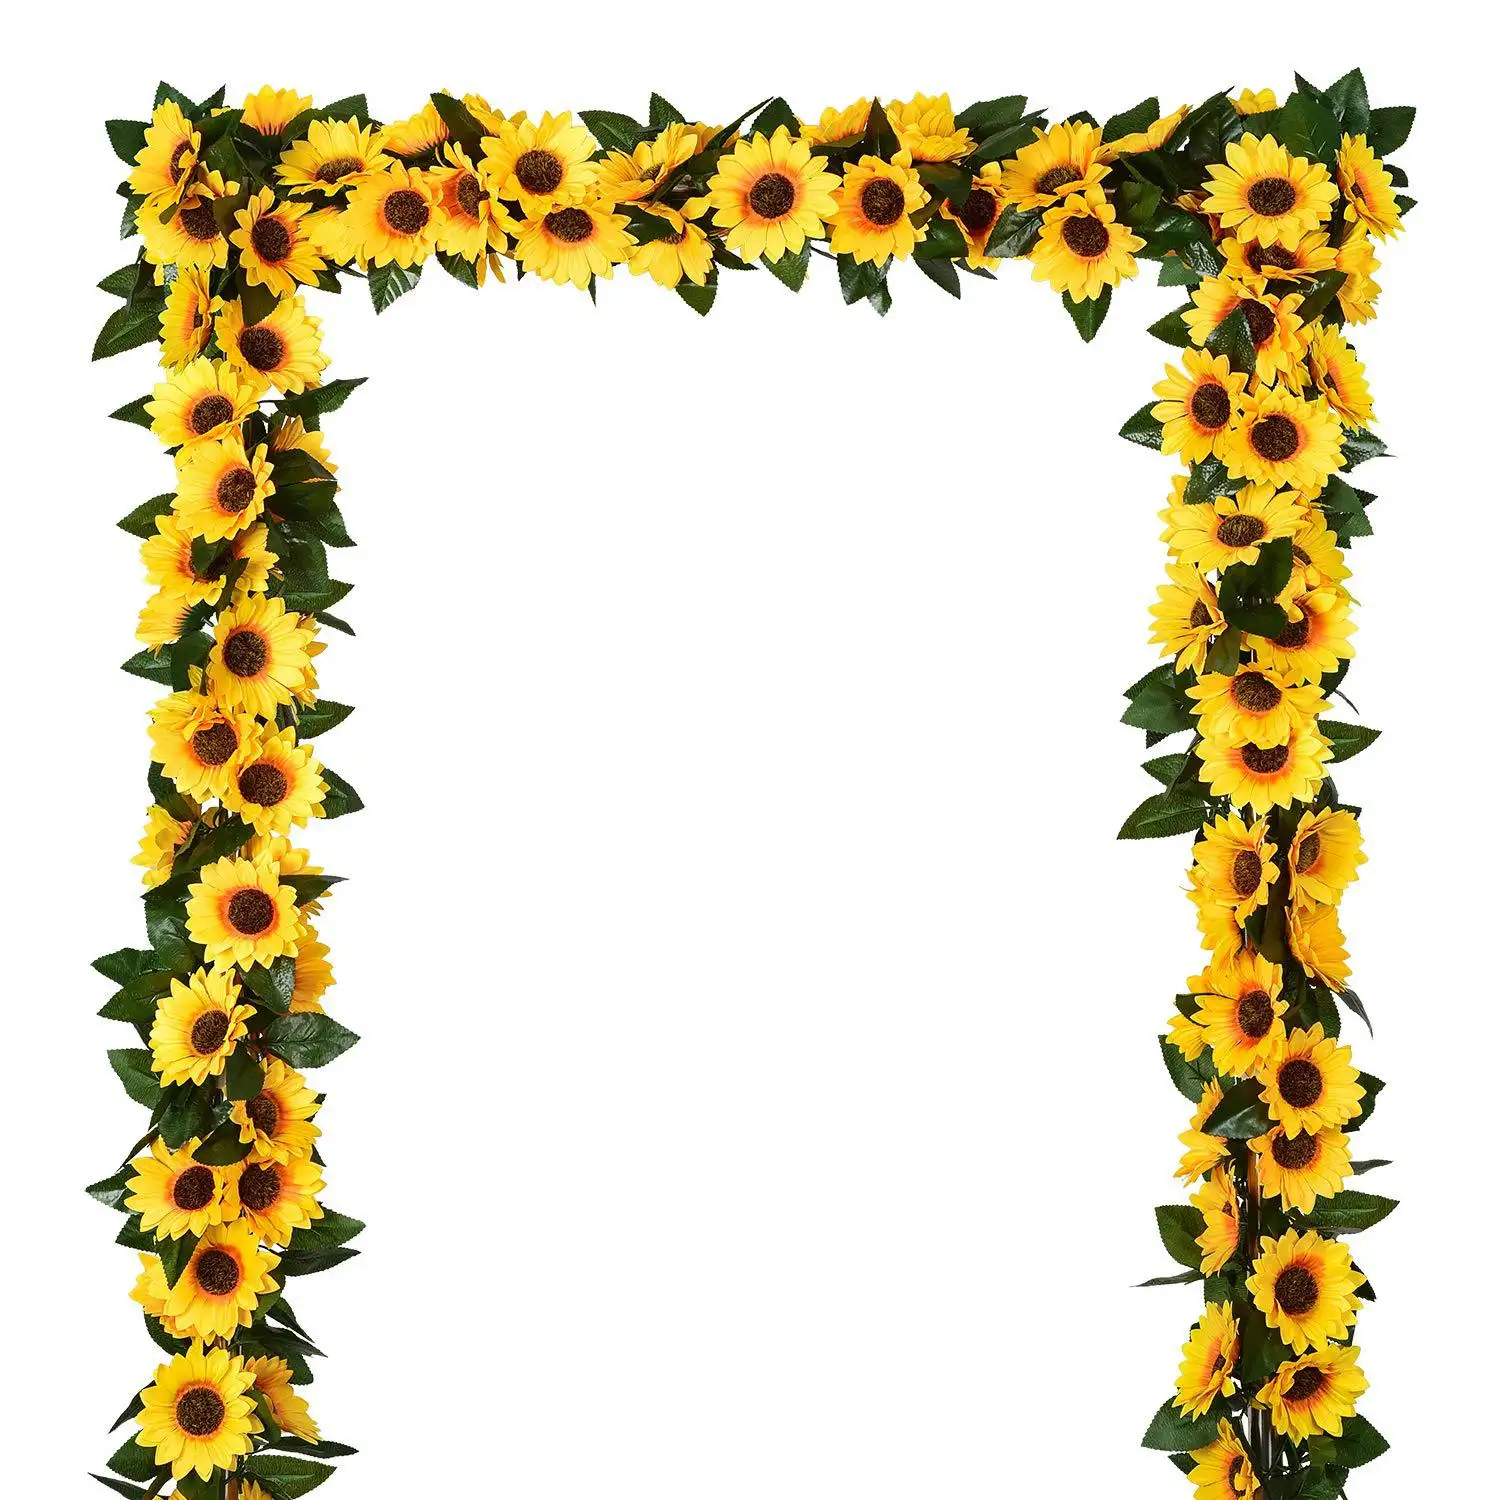 Artificial Sunflower Garland vine leaves Flower Wreath Artificial leave Sunflowers Garland For Wedding Backdrop Arch Wall Decor